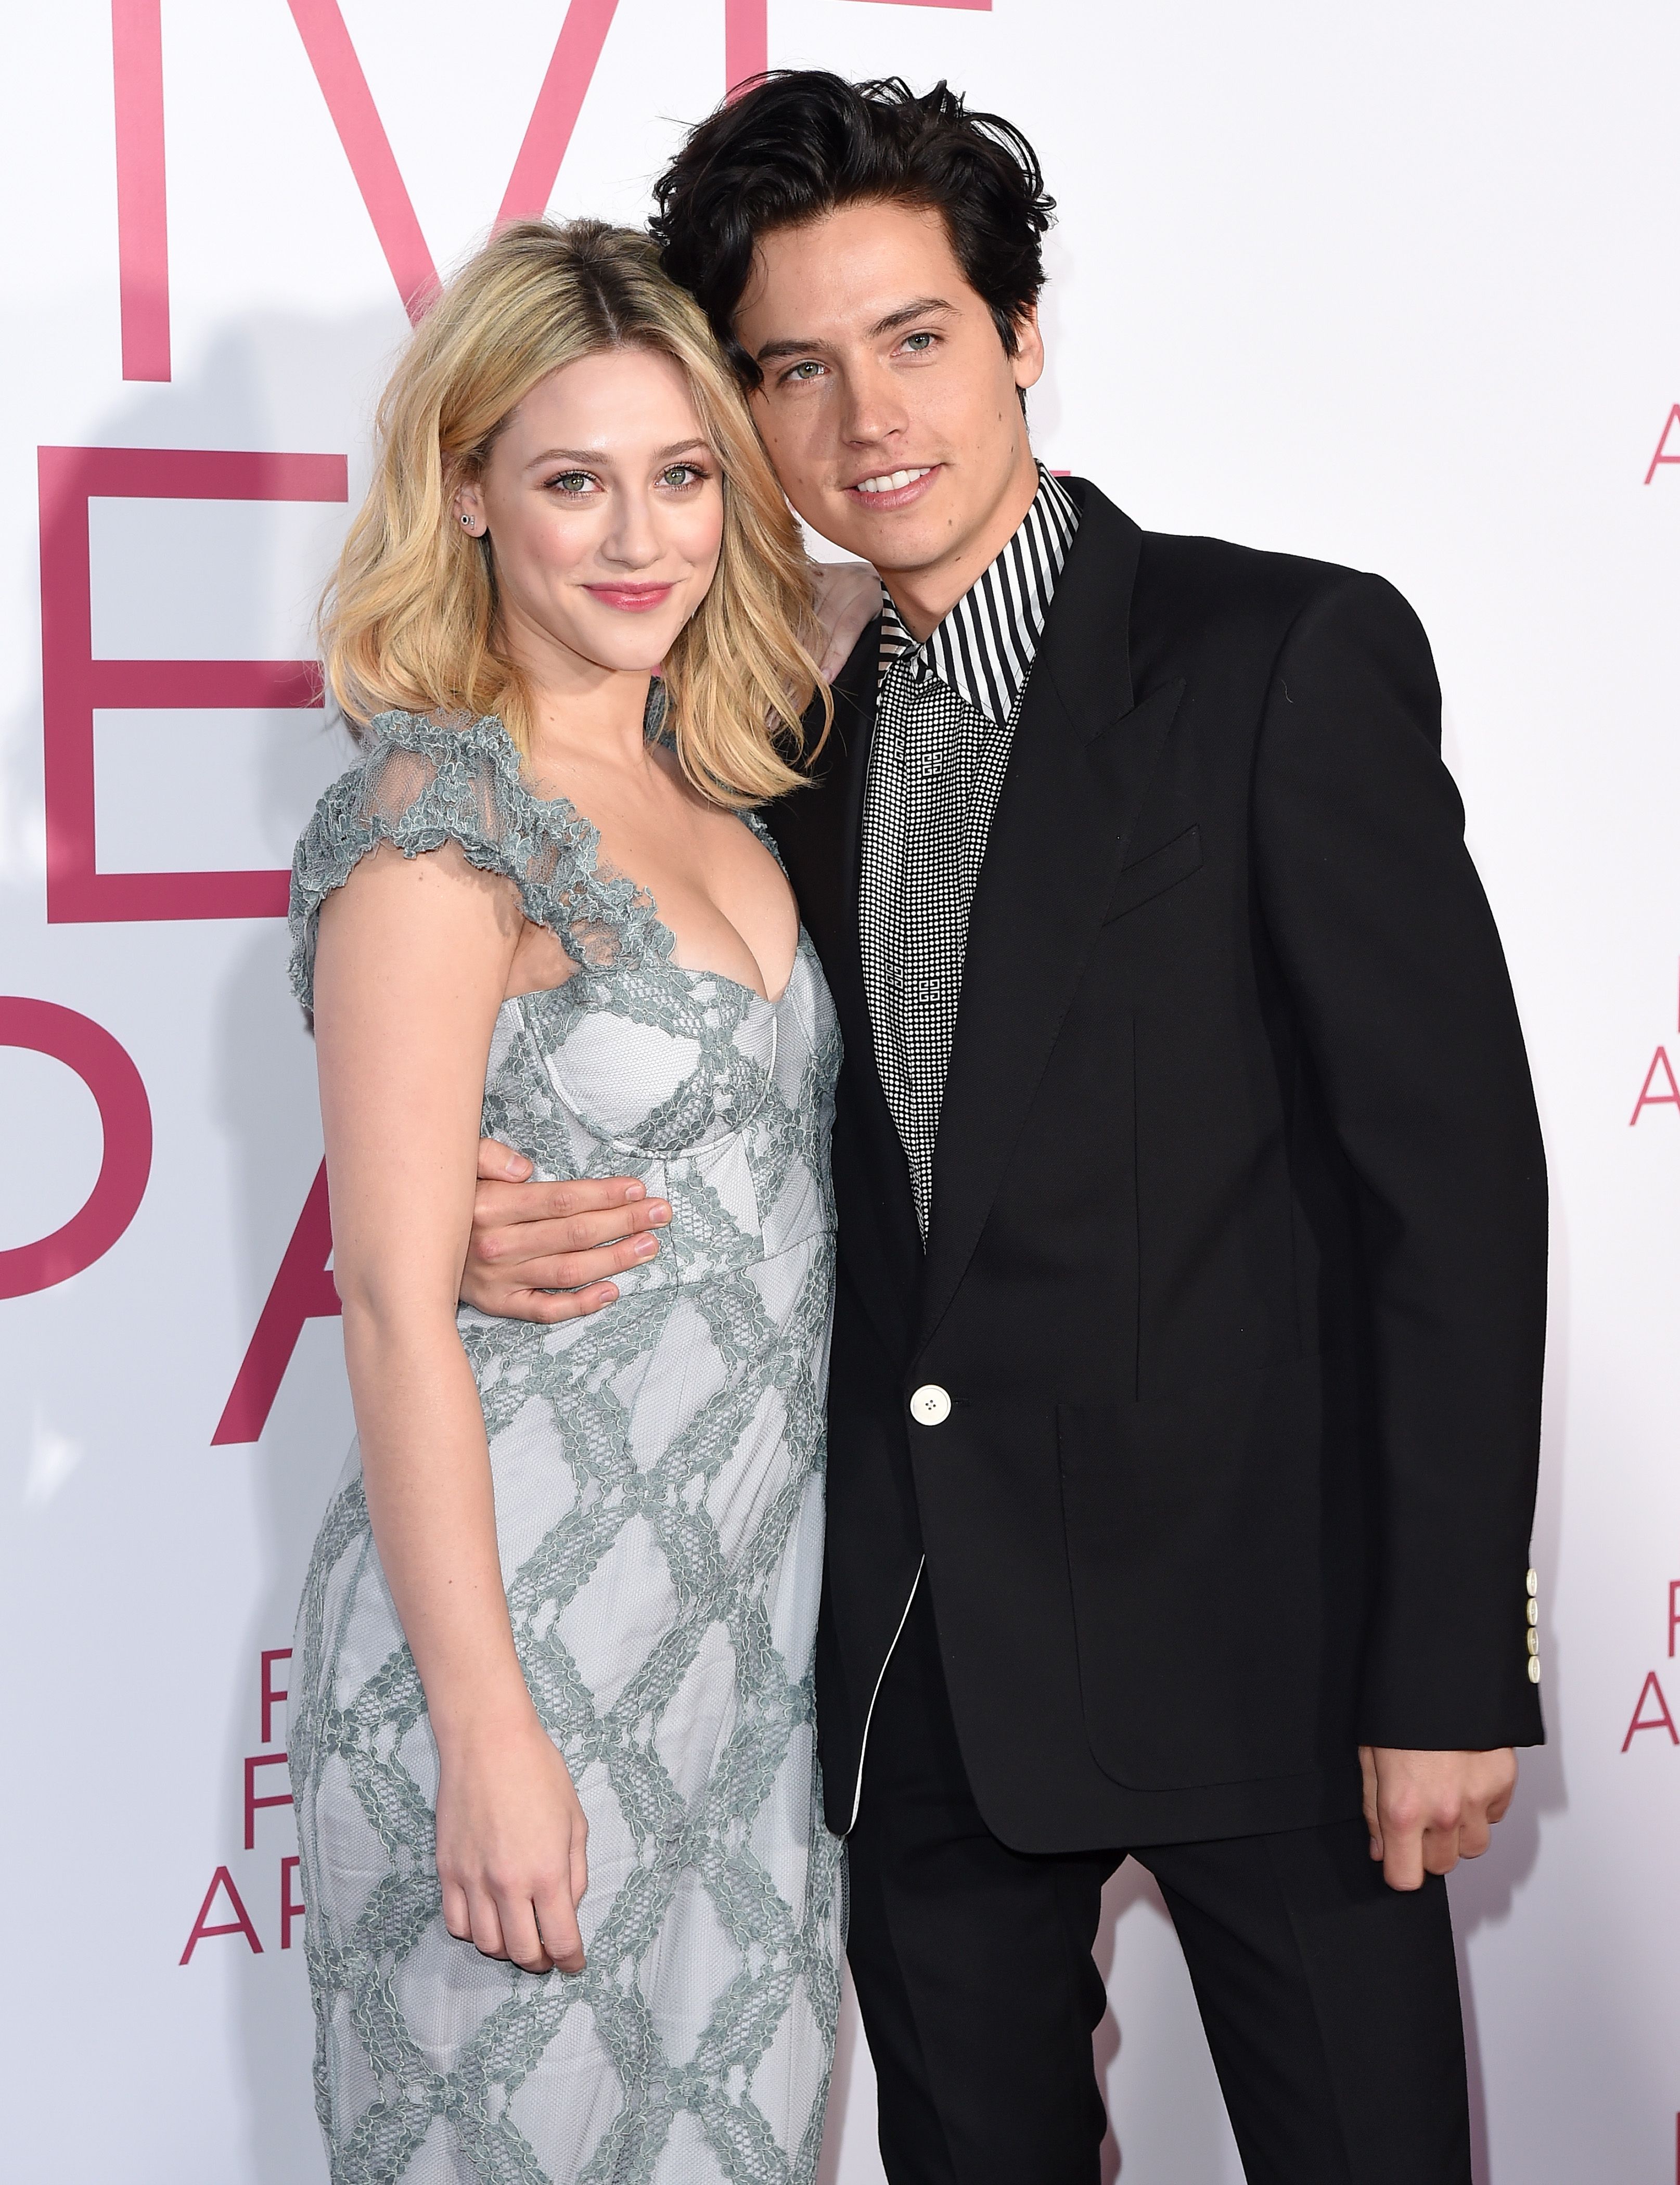 Chloe's sister, Lili Reinhart with her  ex-boyfriend, Cole Sprouse.